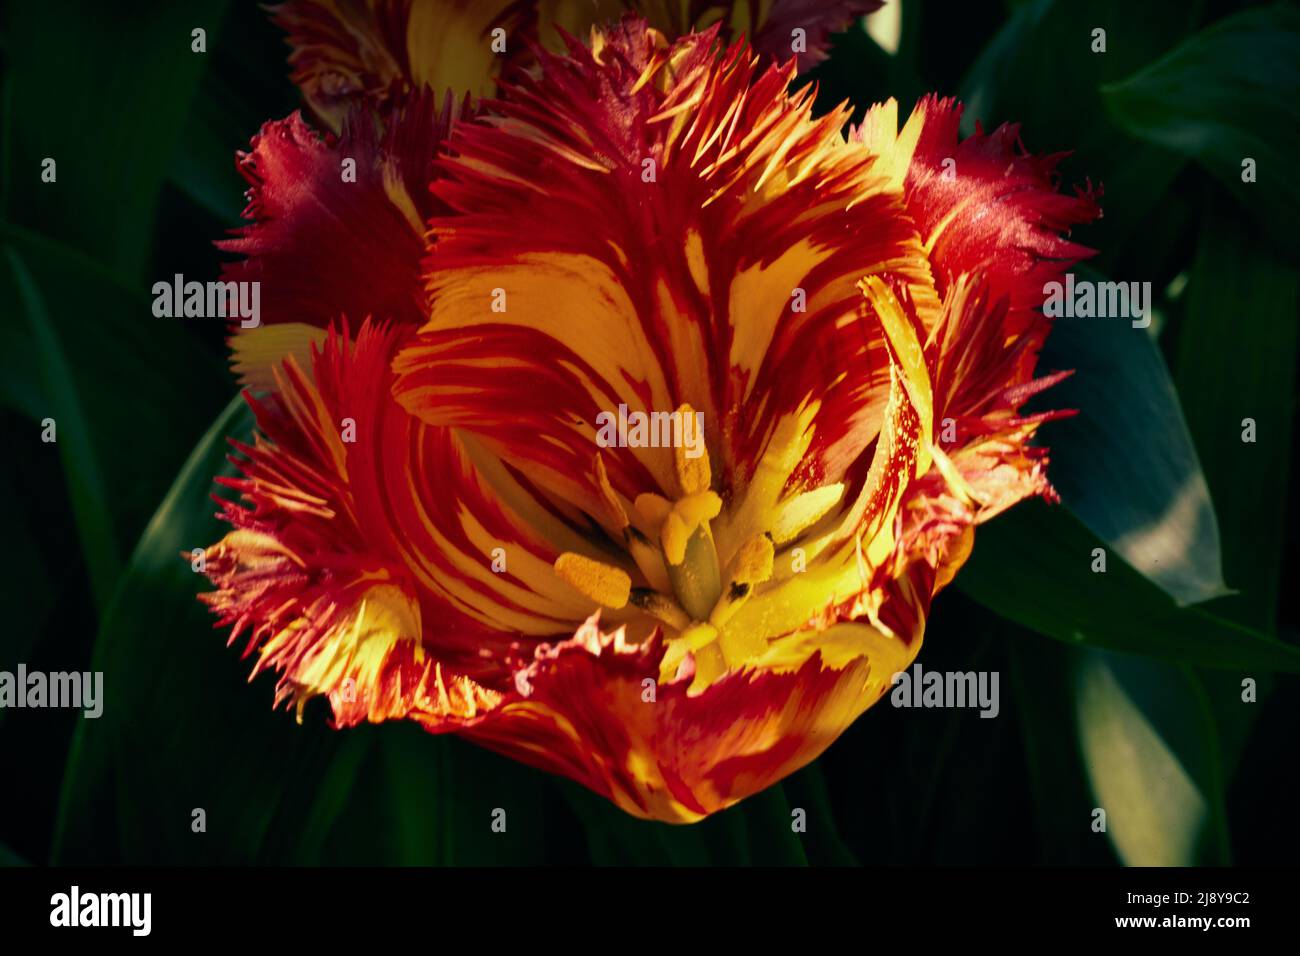 Close-up head of red yellow mottled tulips in sunlight with dark blurred background Stock Photo